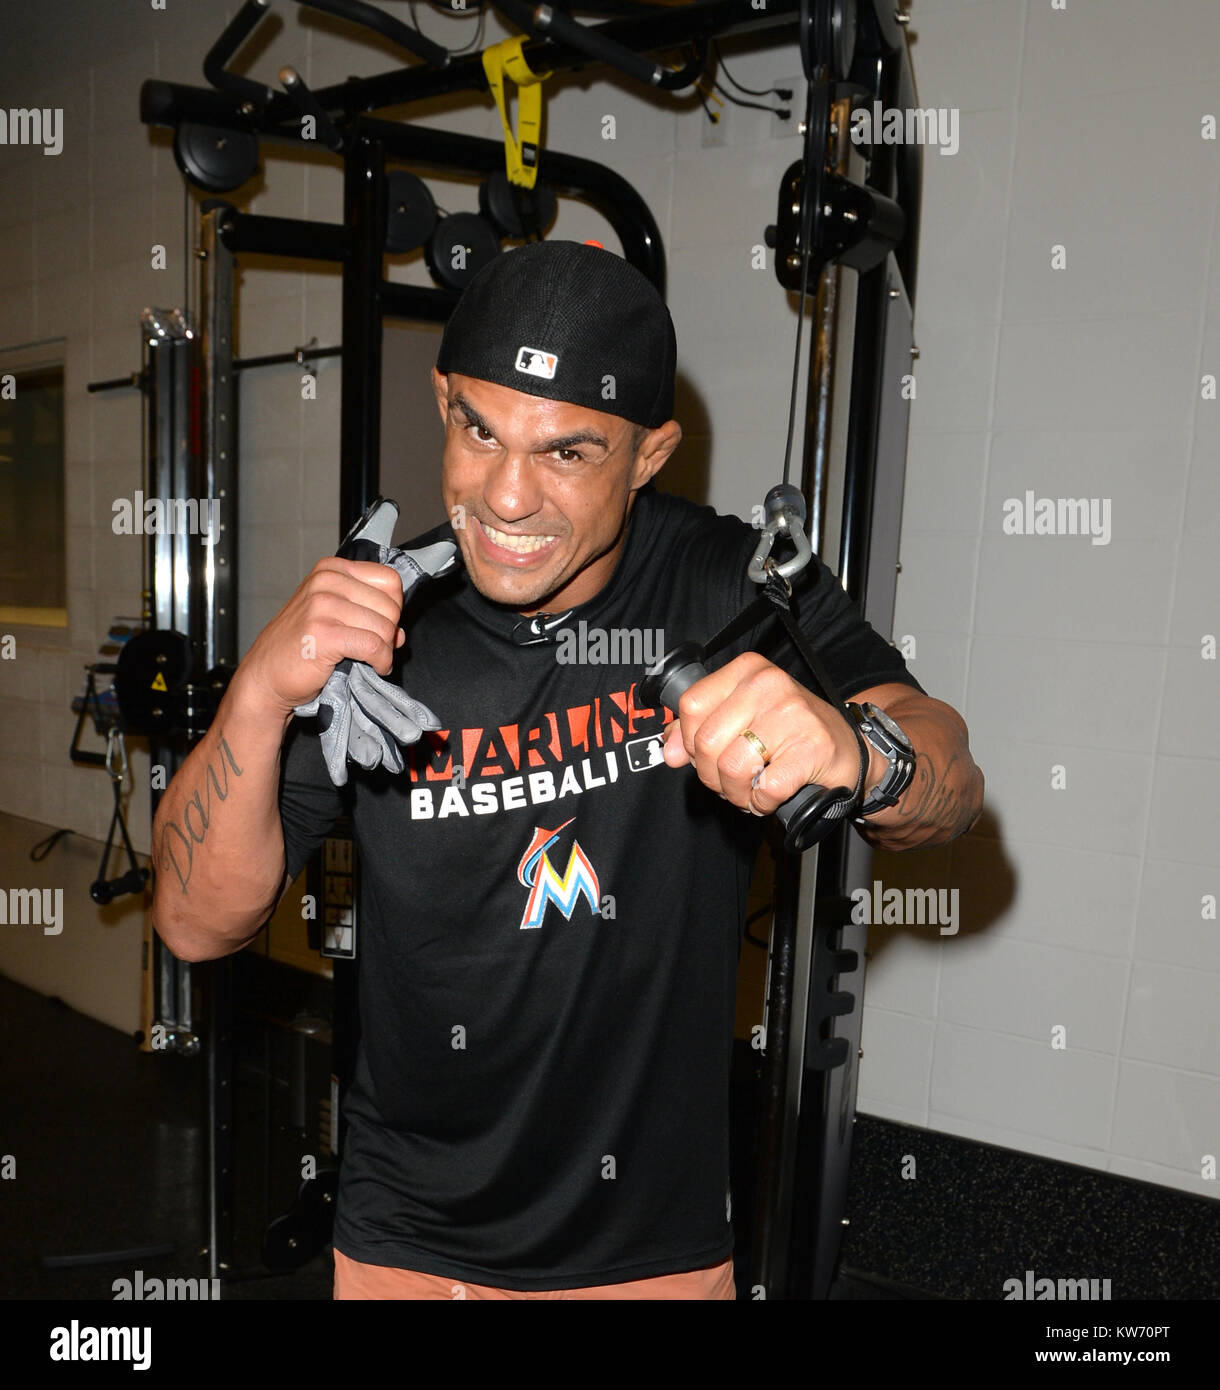 MIAMI, FL - AUGUST 19: (EXCLUSIVE COVERAGE) UFC Fighter Vitor Belfort pays a visit to his Miami Marlin friends and grabs a quick Haircut at Headzup with the Marlins Barber Hugo “Juice” Tandron prior to their game at Marlins Park. Vitor Vieira Belfort is a Brazilian mixed martial artist and former UFC Light Heavyweight Champion as well as UFC 12 Heavyweight Tournament Champion. Belfort was born in Rio de Janeiro and studied jiu-jitsu with the Gracie family, namely Carlson Gracie. As of July 22, 2014, he is #2 in official UFC middleweight rankings, #13 in light heavyweight and #12 pound-for-poun Stock Photo